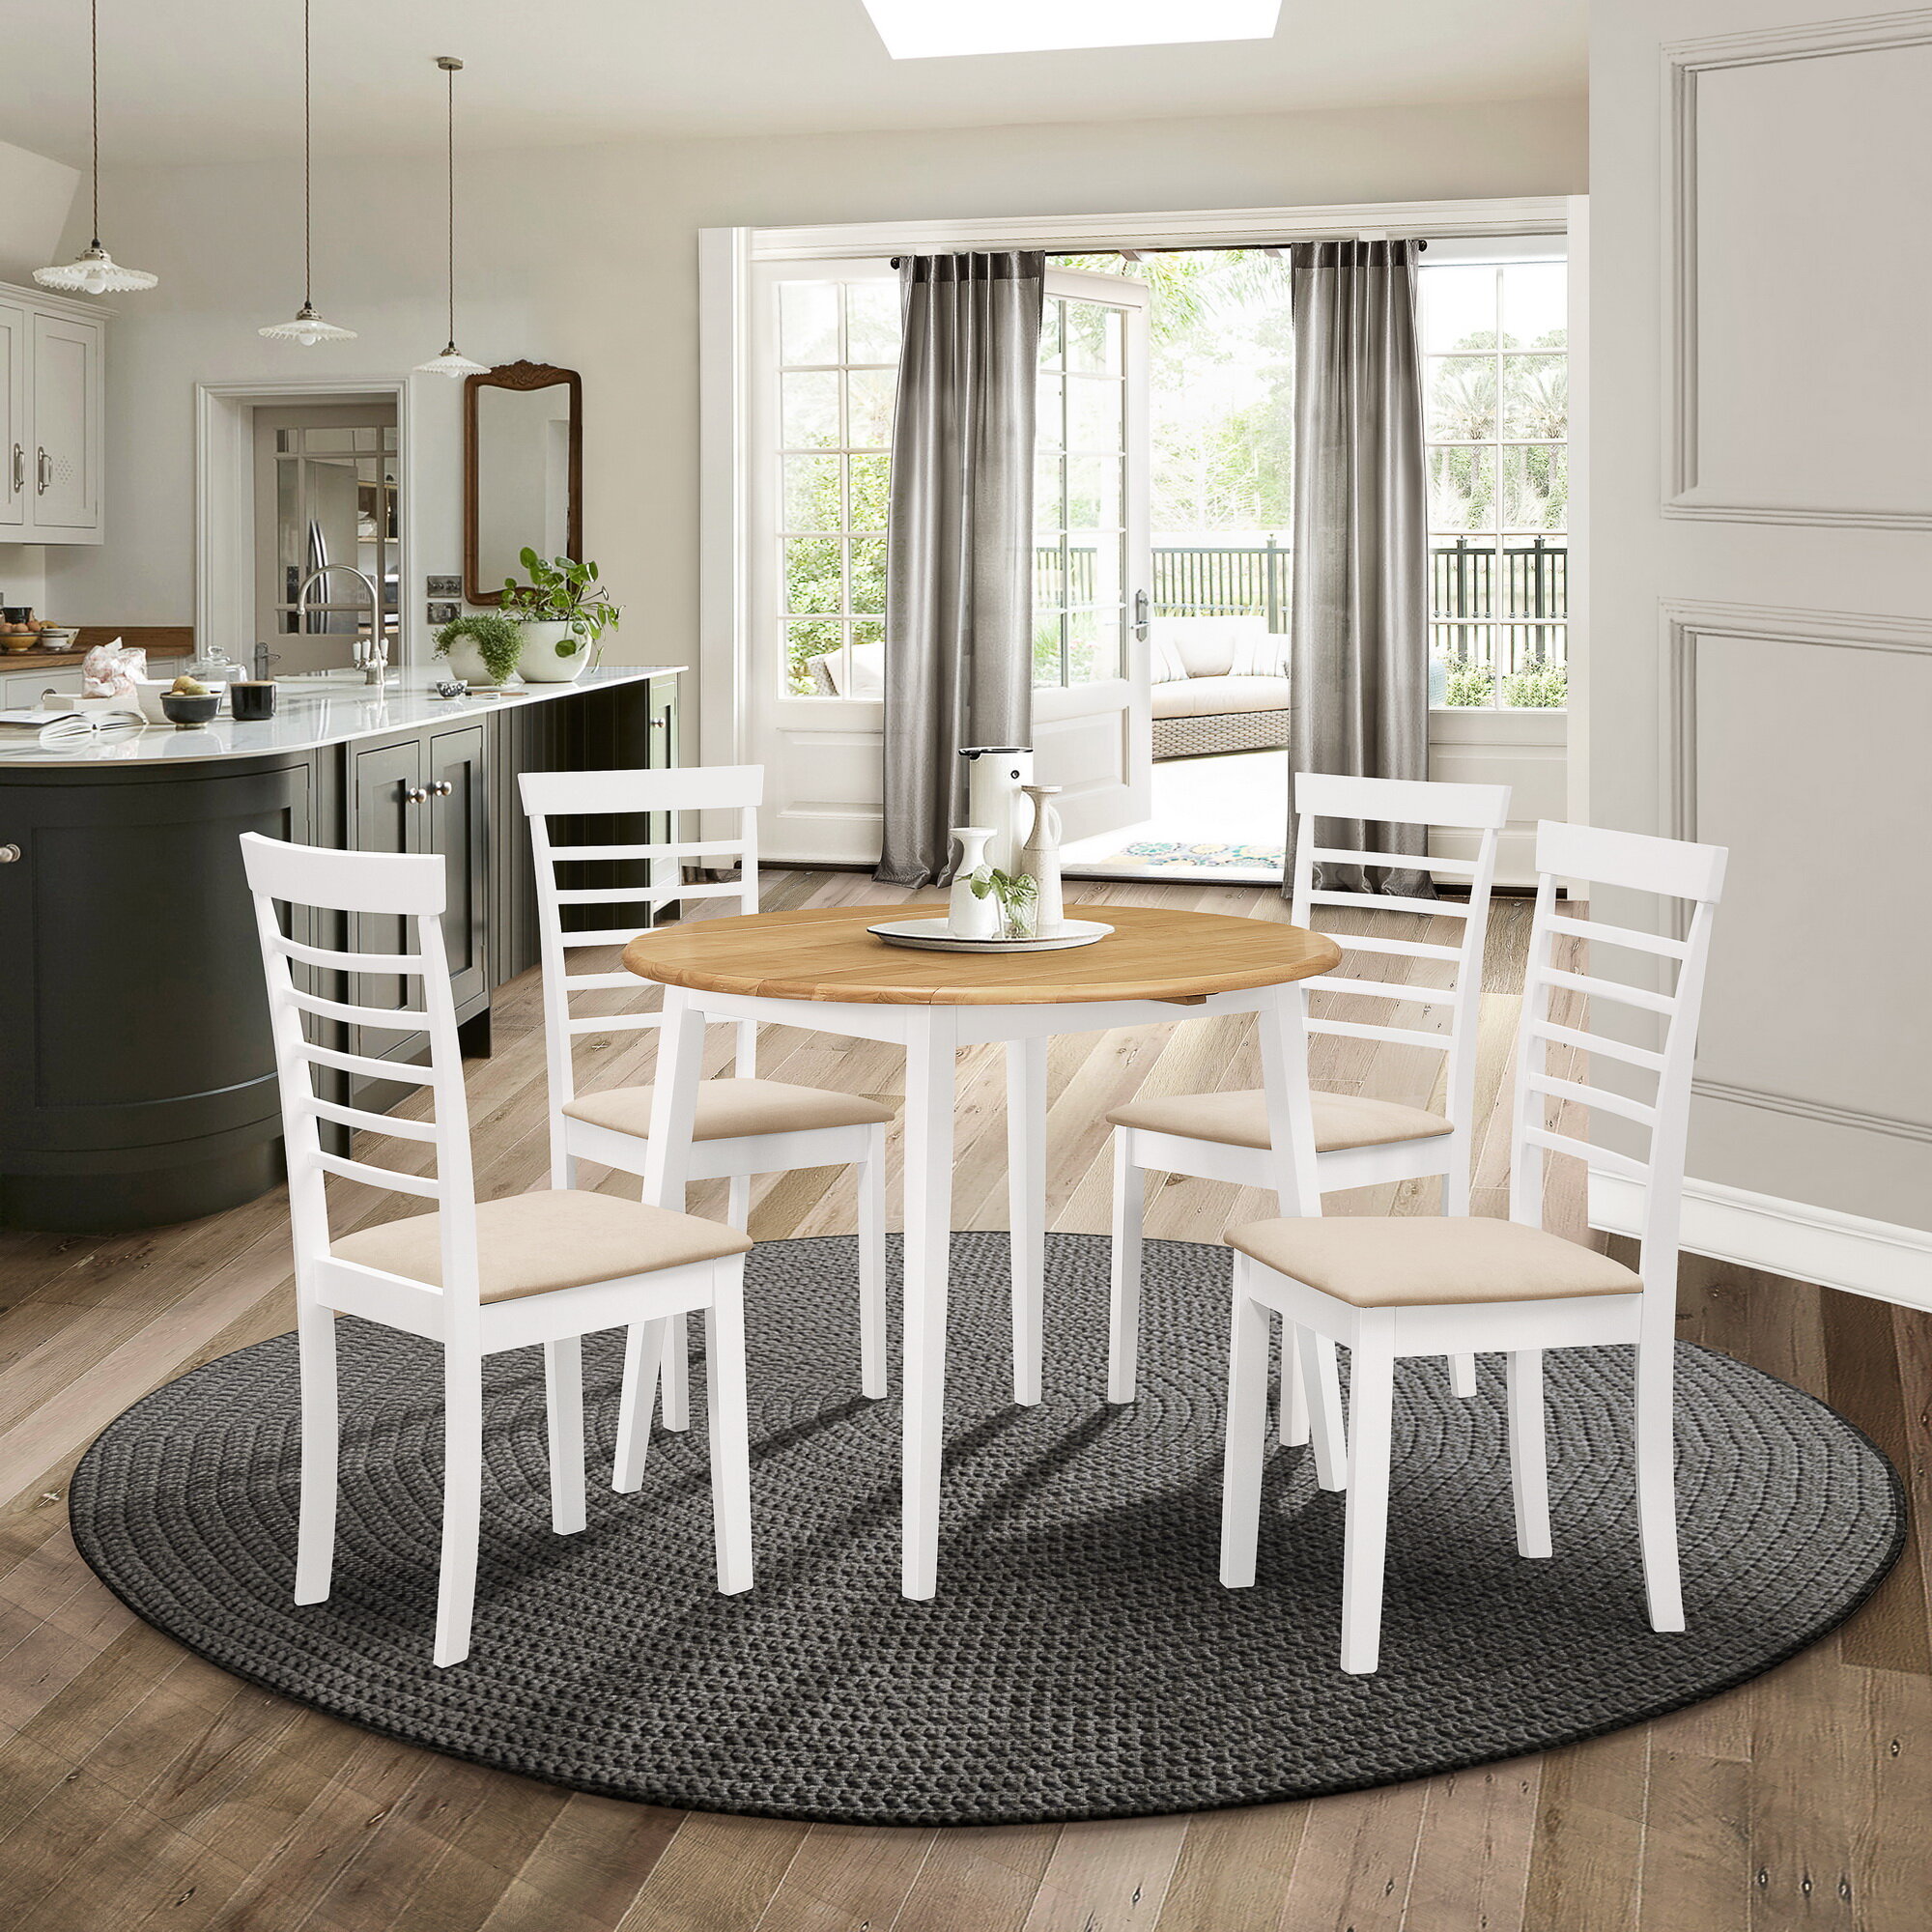 Brambly Cottage Mcneill Extendable Dining Set With 4 Chairs Reviews Wayfair Co Uk